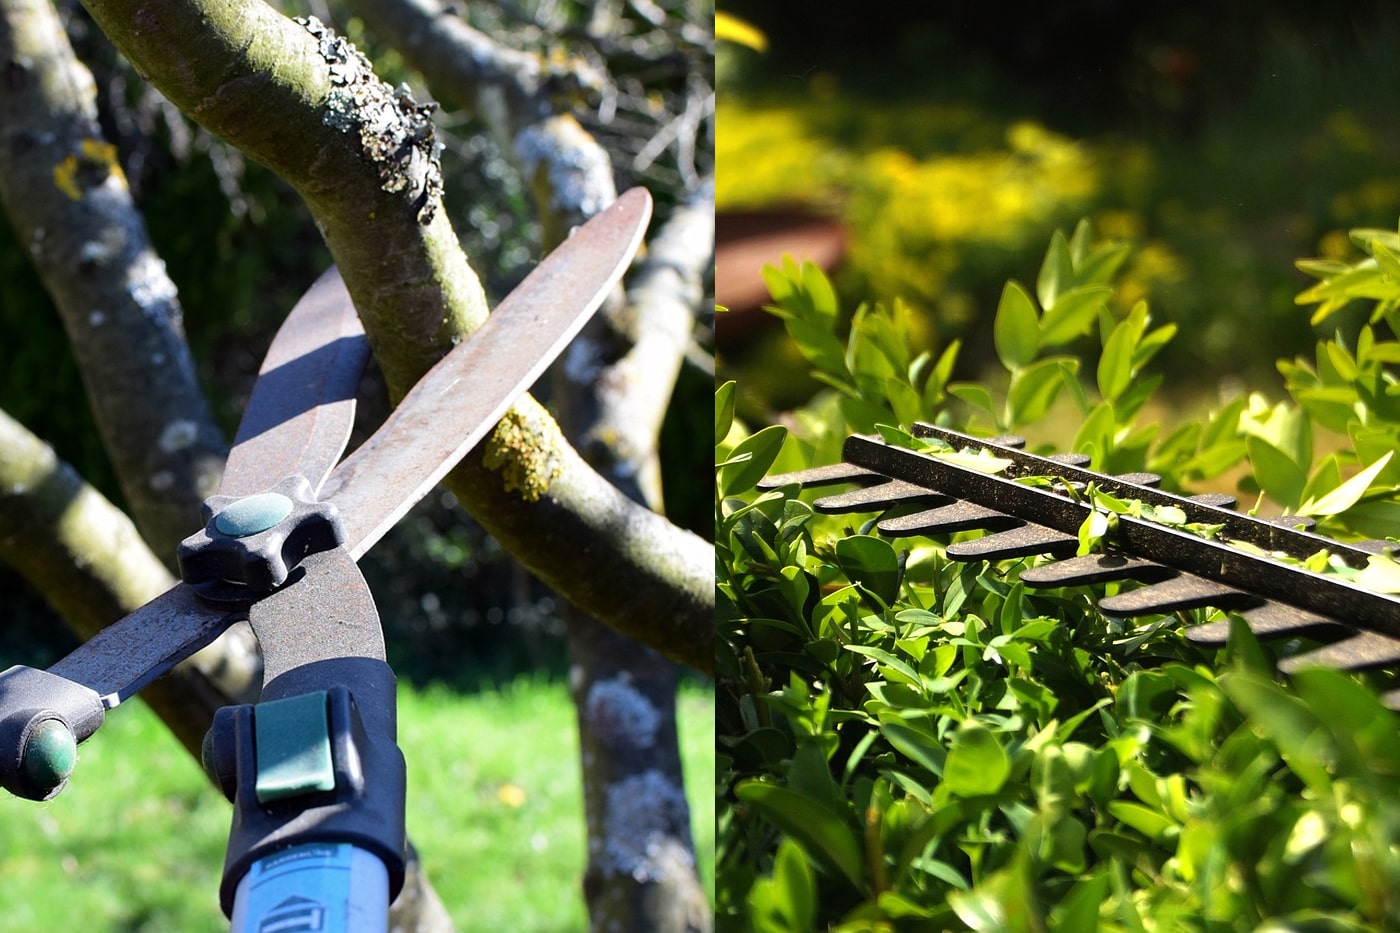 hedge shears and electric hedge trimmer